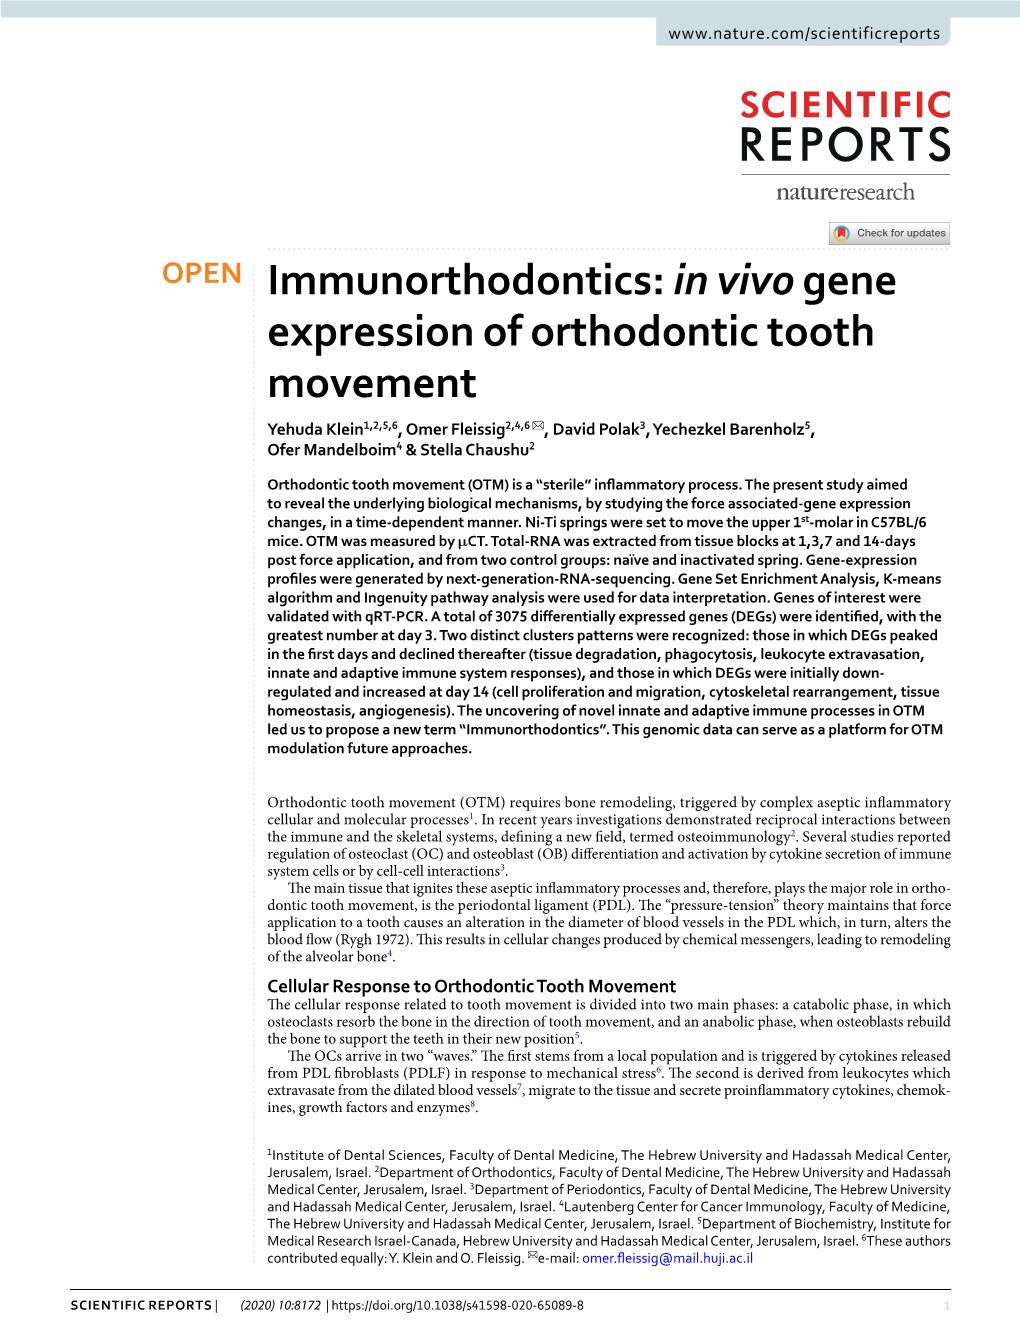 In Vivo Gene Expression of Orthodontic Tooth Movement